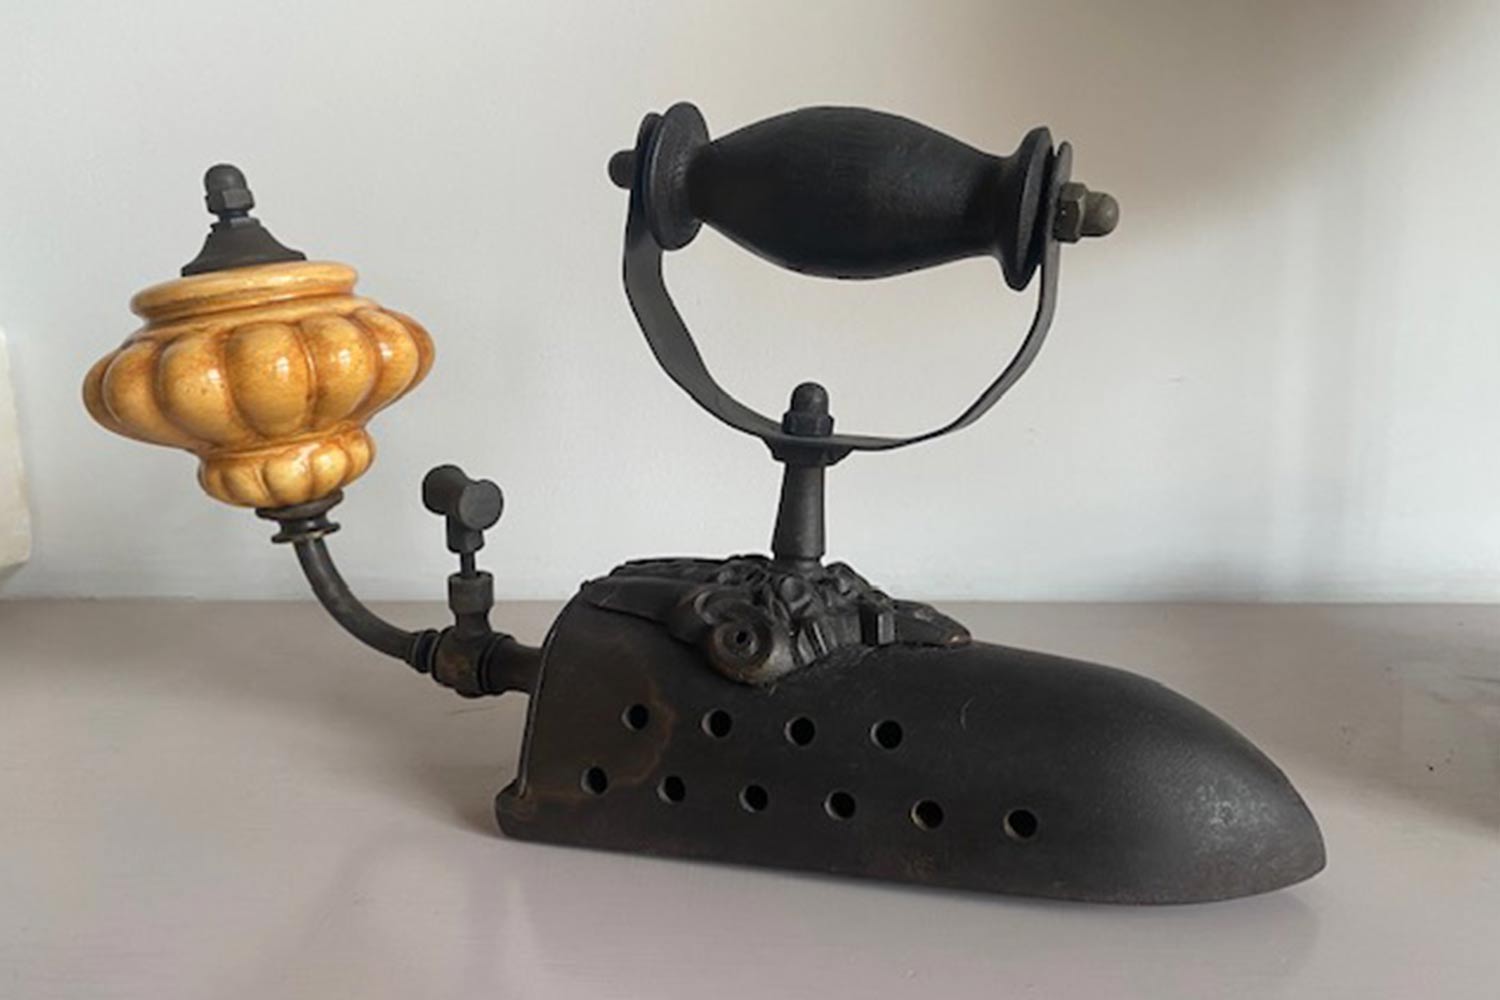 A vintage iron (really made of iron)